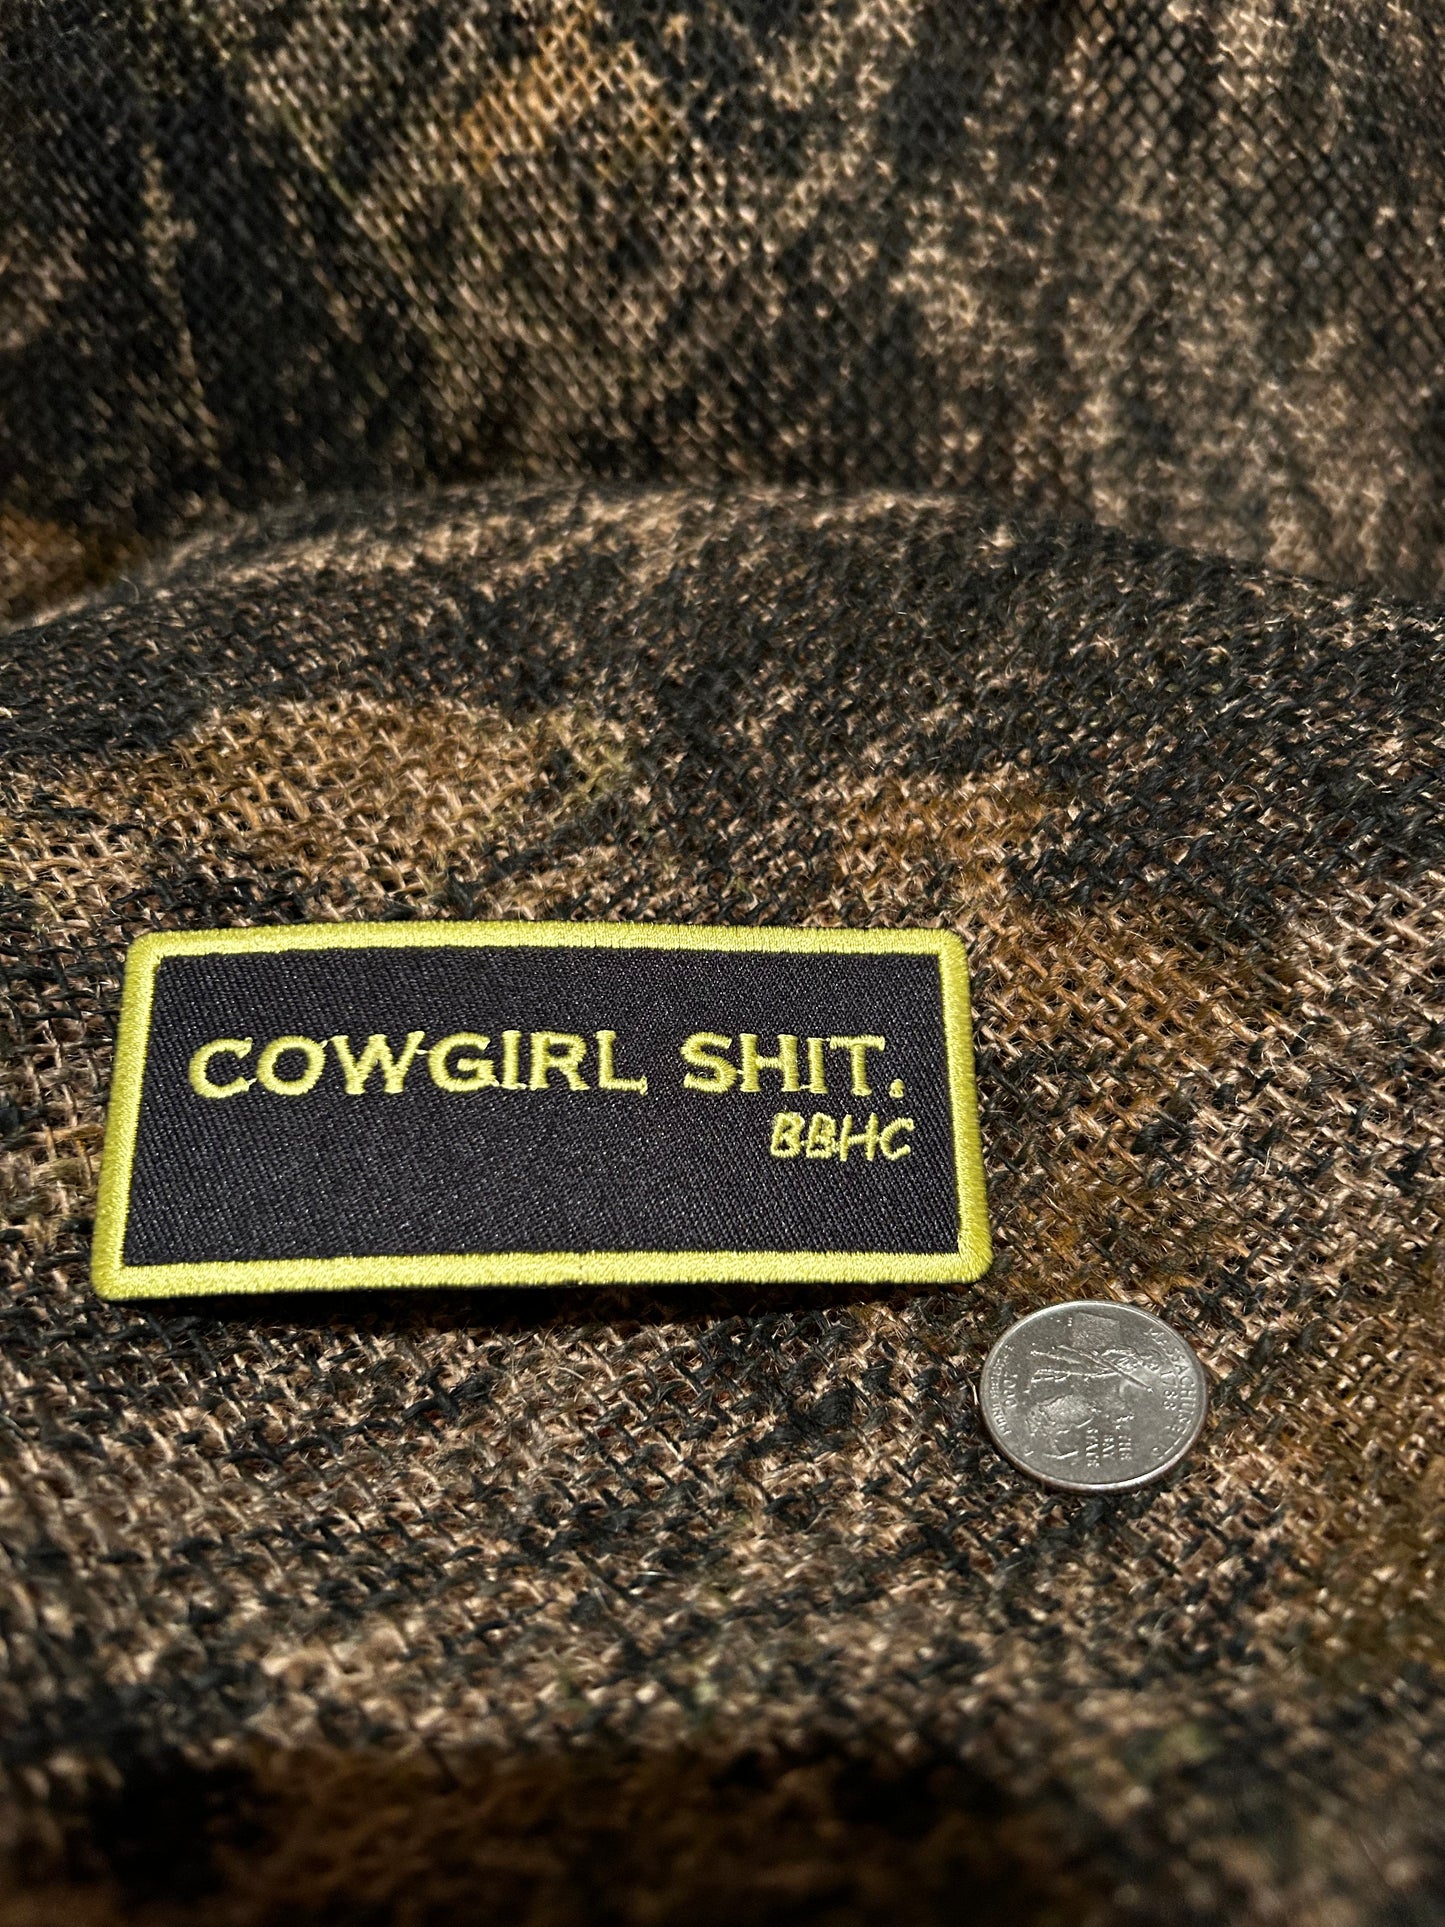 BBHC Cowgirl Sh*t